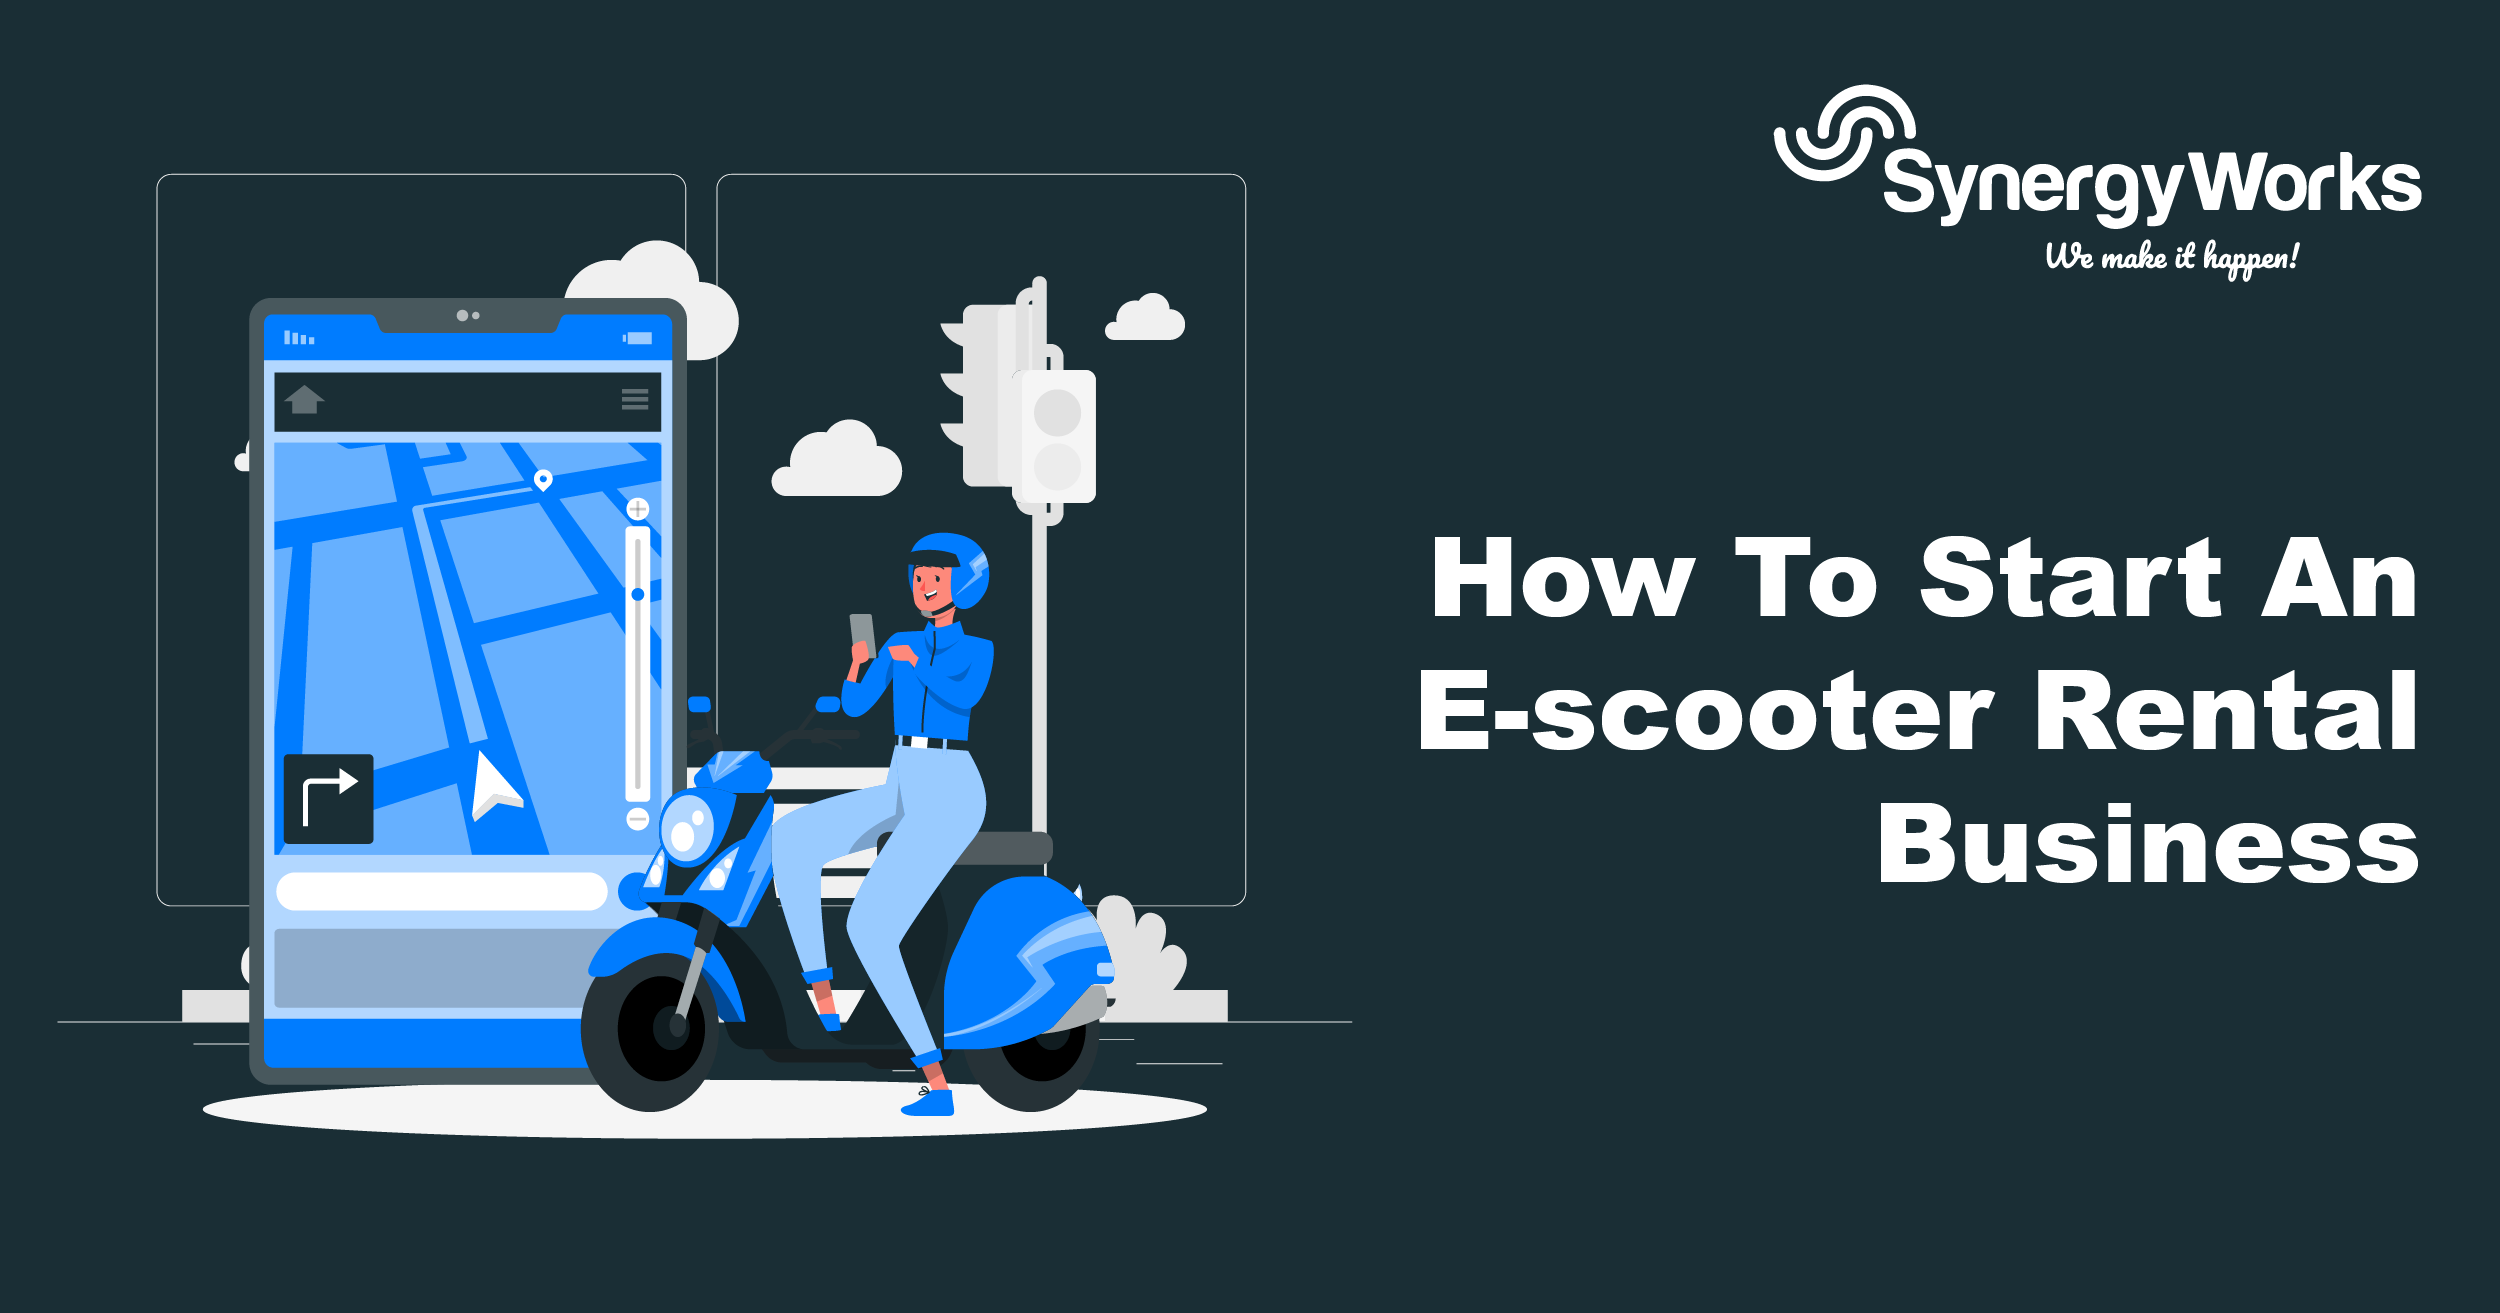 How To Start An E-scooter Rental Business